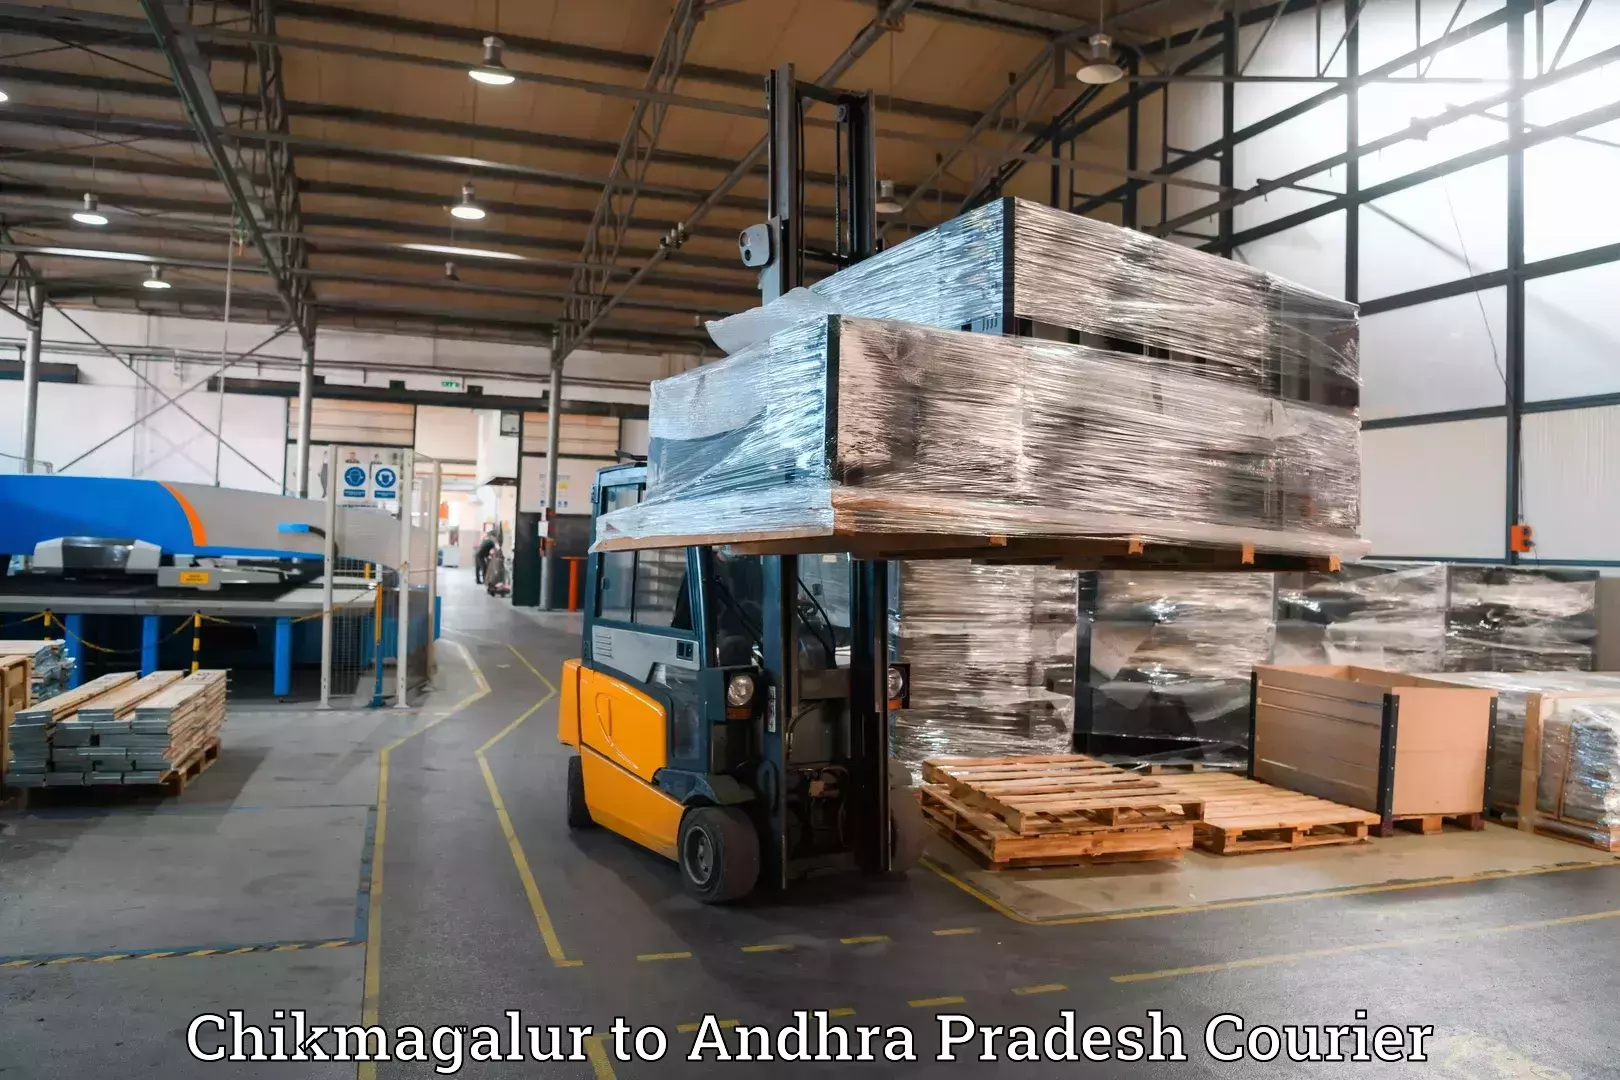 Baggage shipping experts Chikmagalur to Nellore